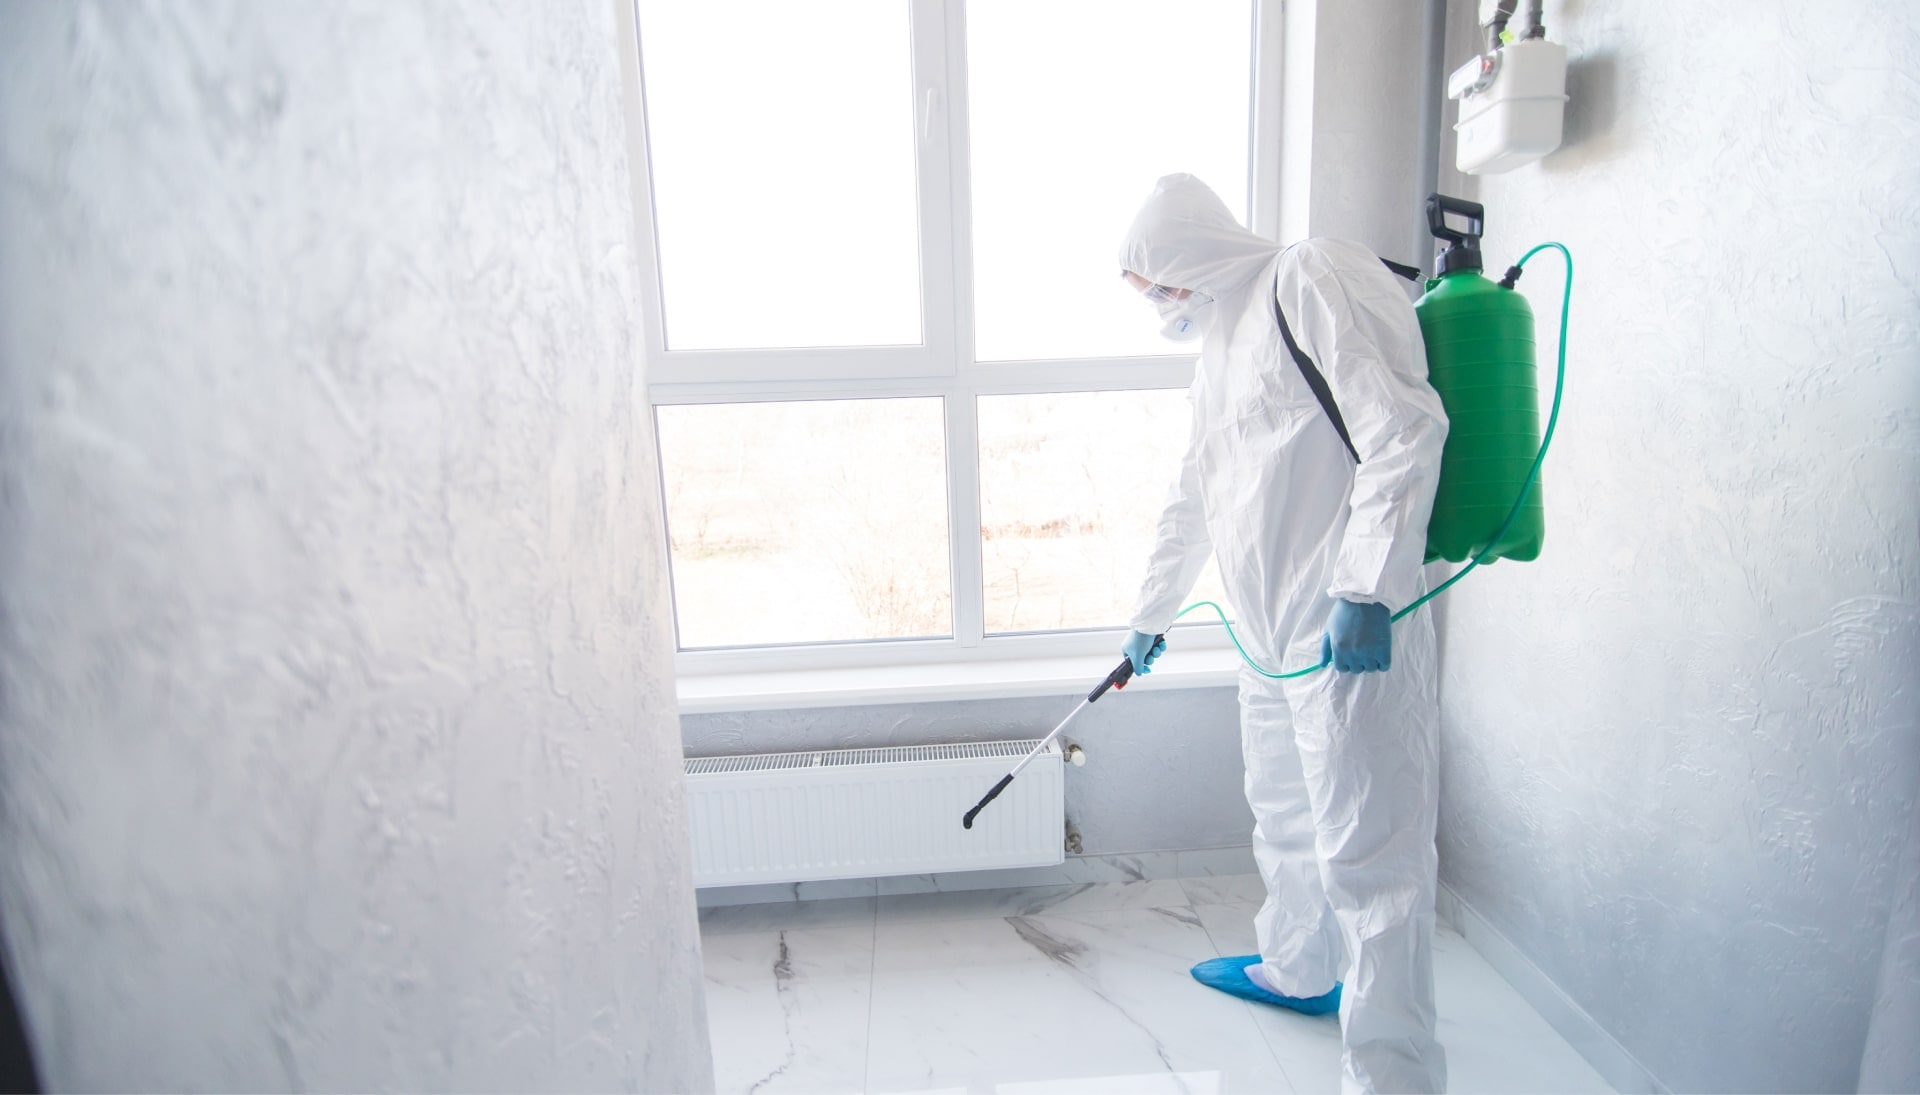 We provide the highest-quality mold inspection, testing, and removal services in the Louisville, Kentucky area.